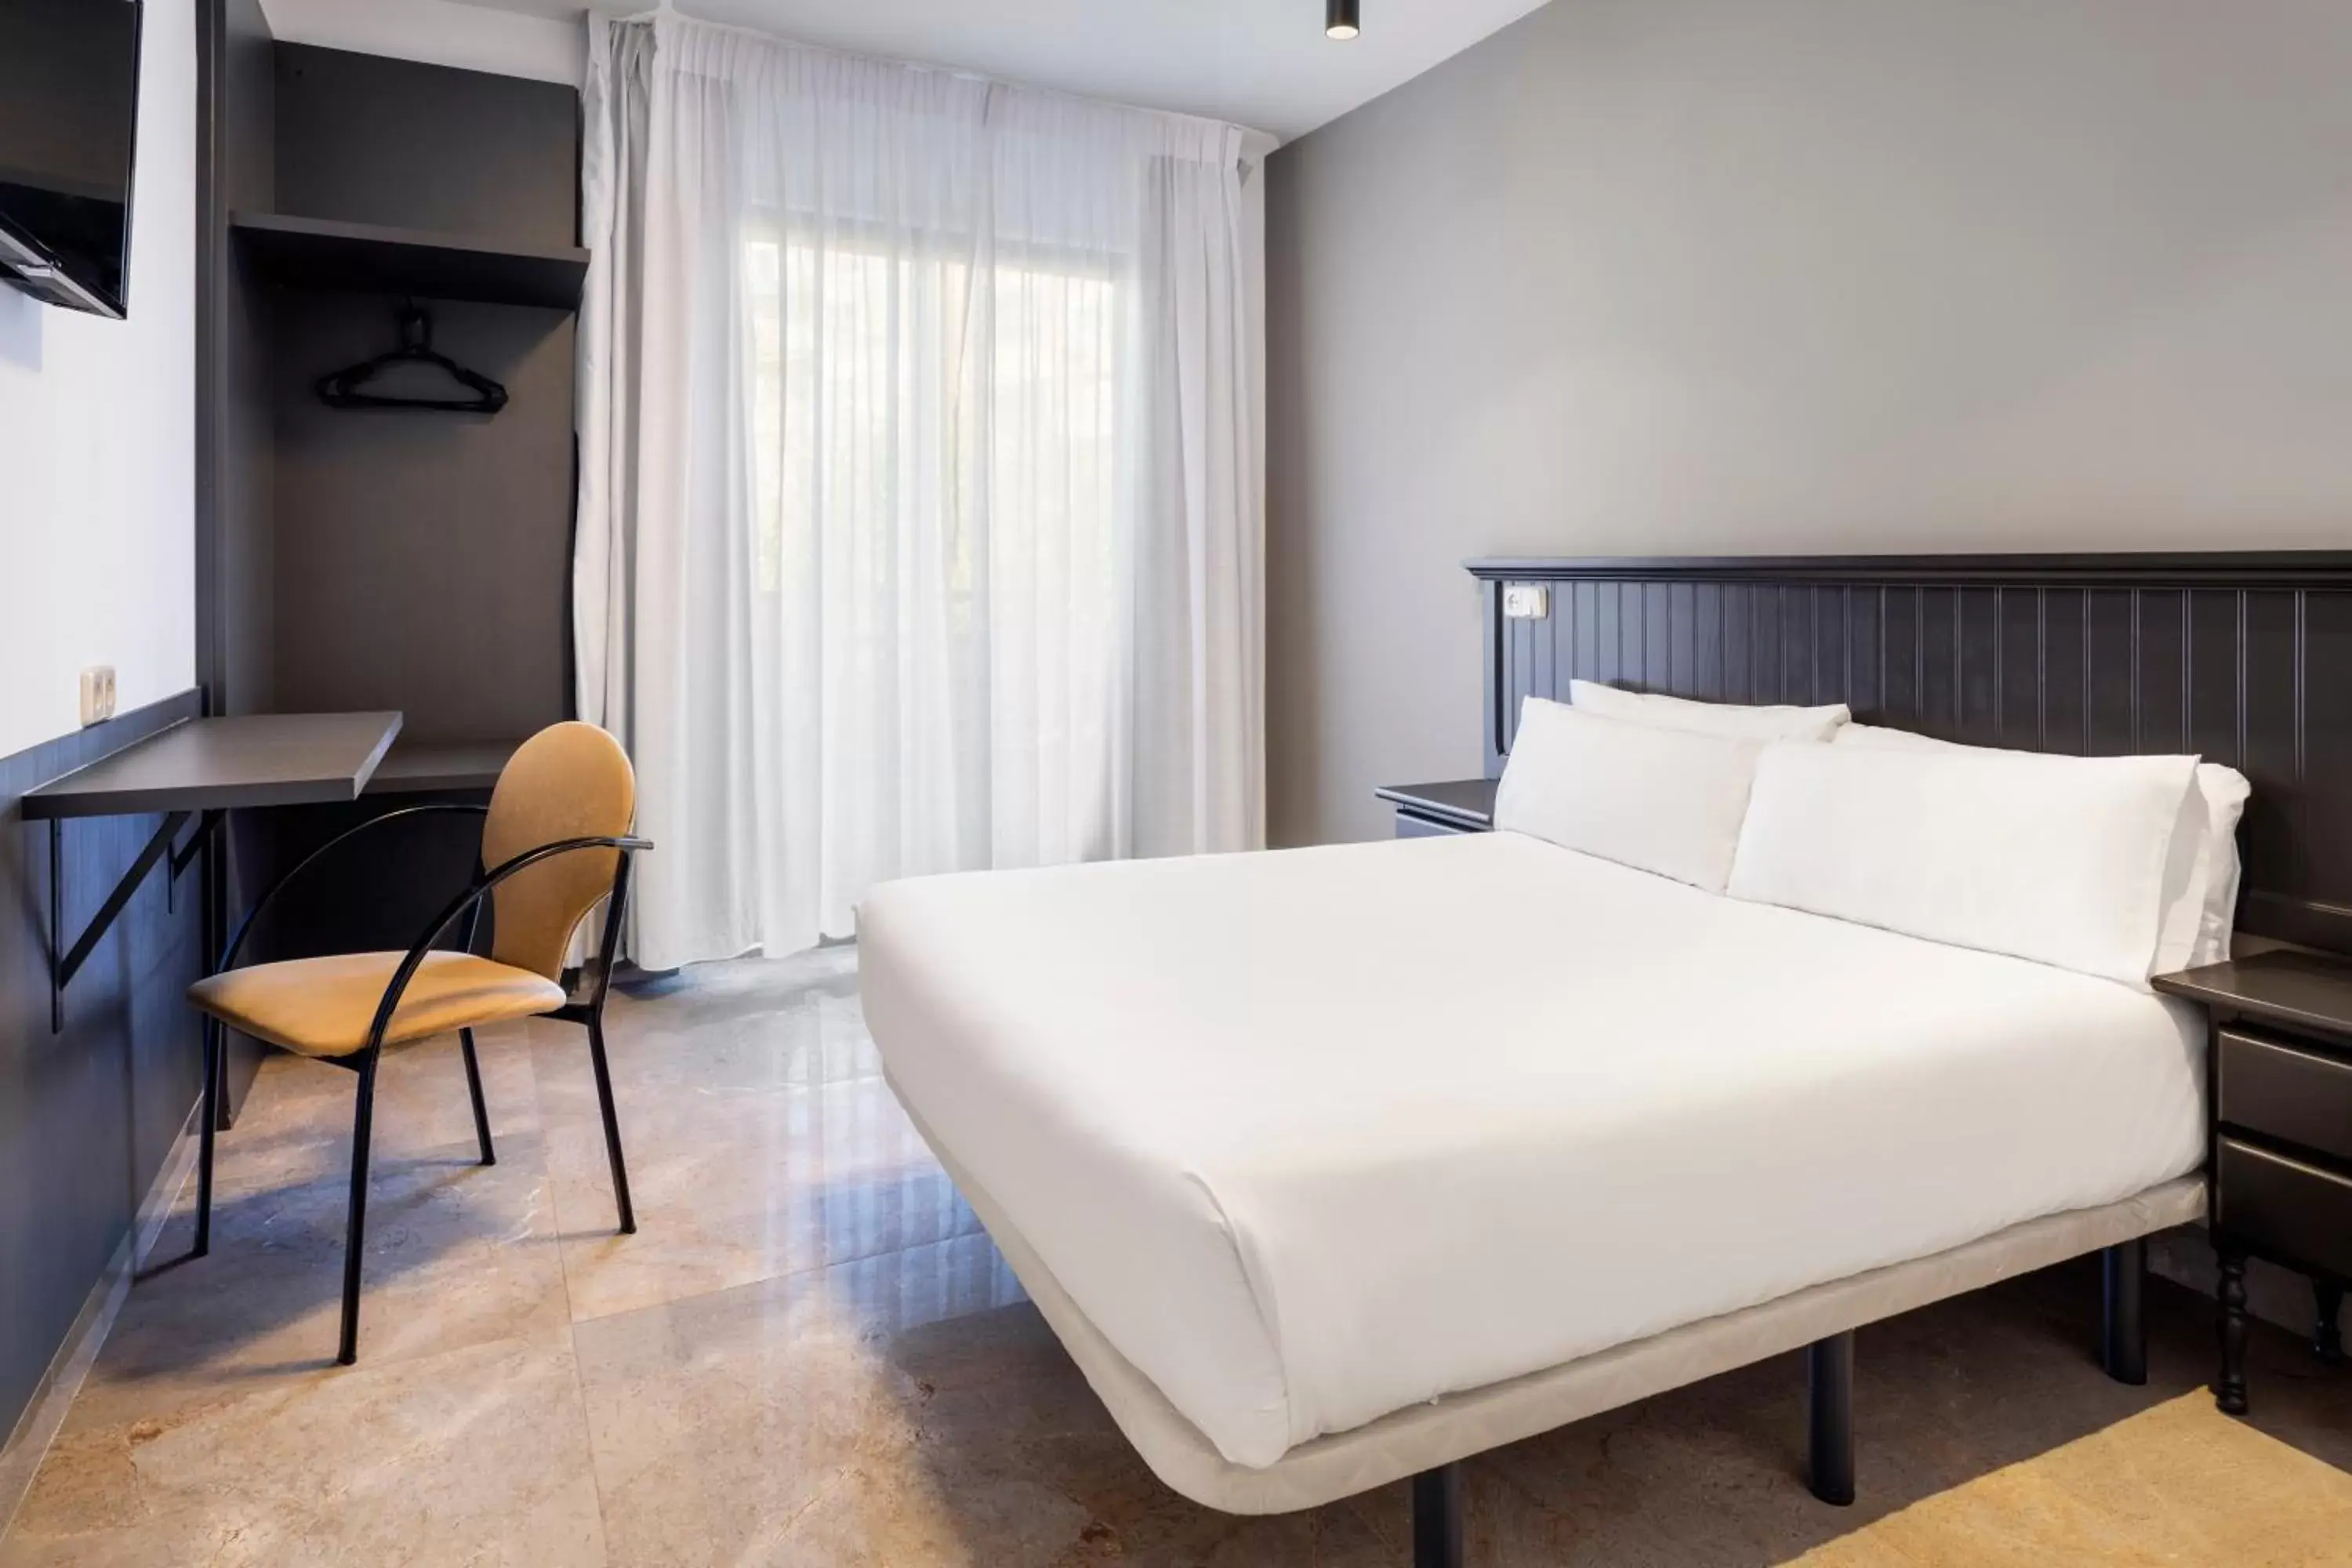 Bed in Hotel Victoria Valdemoro Inspired by B&B HOTELS